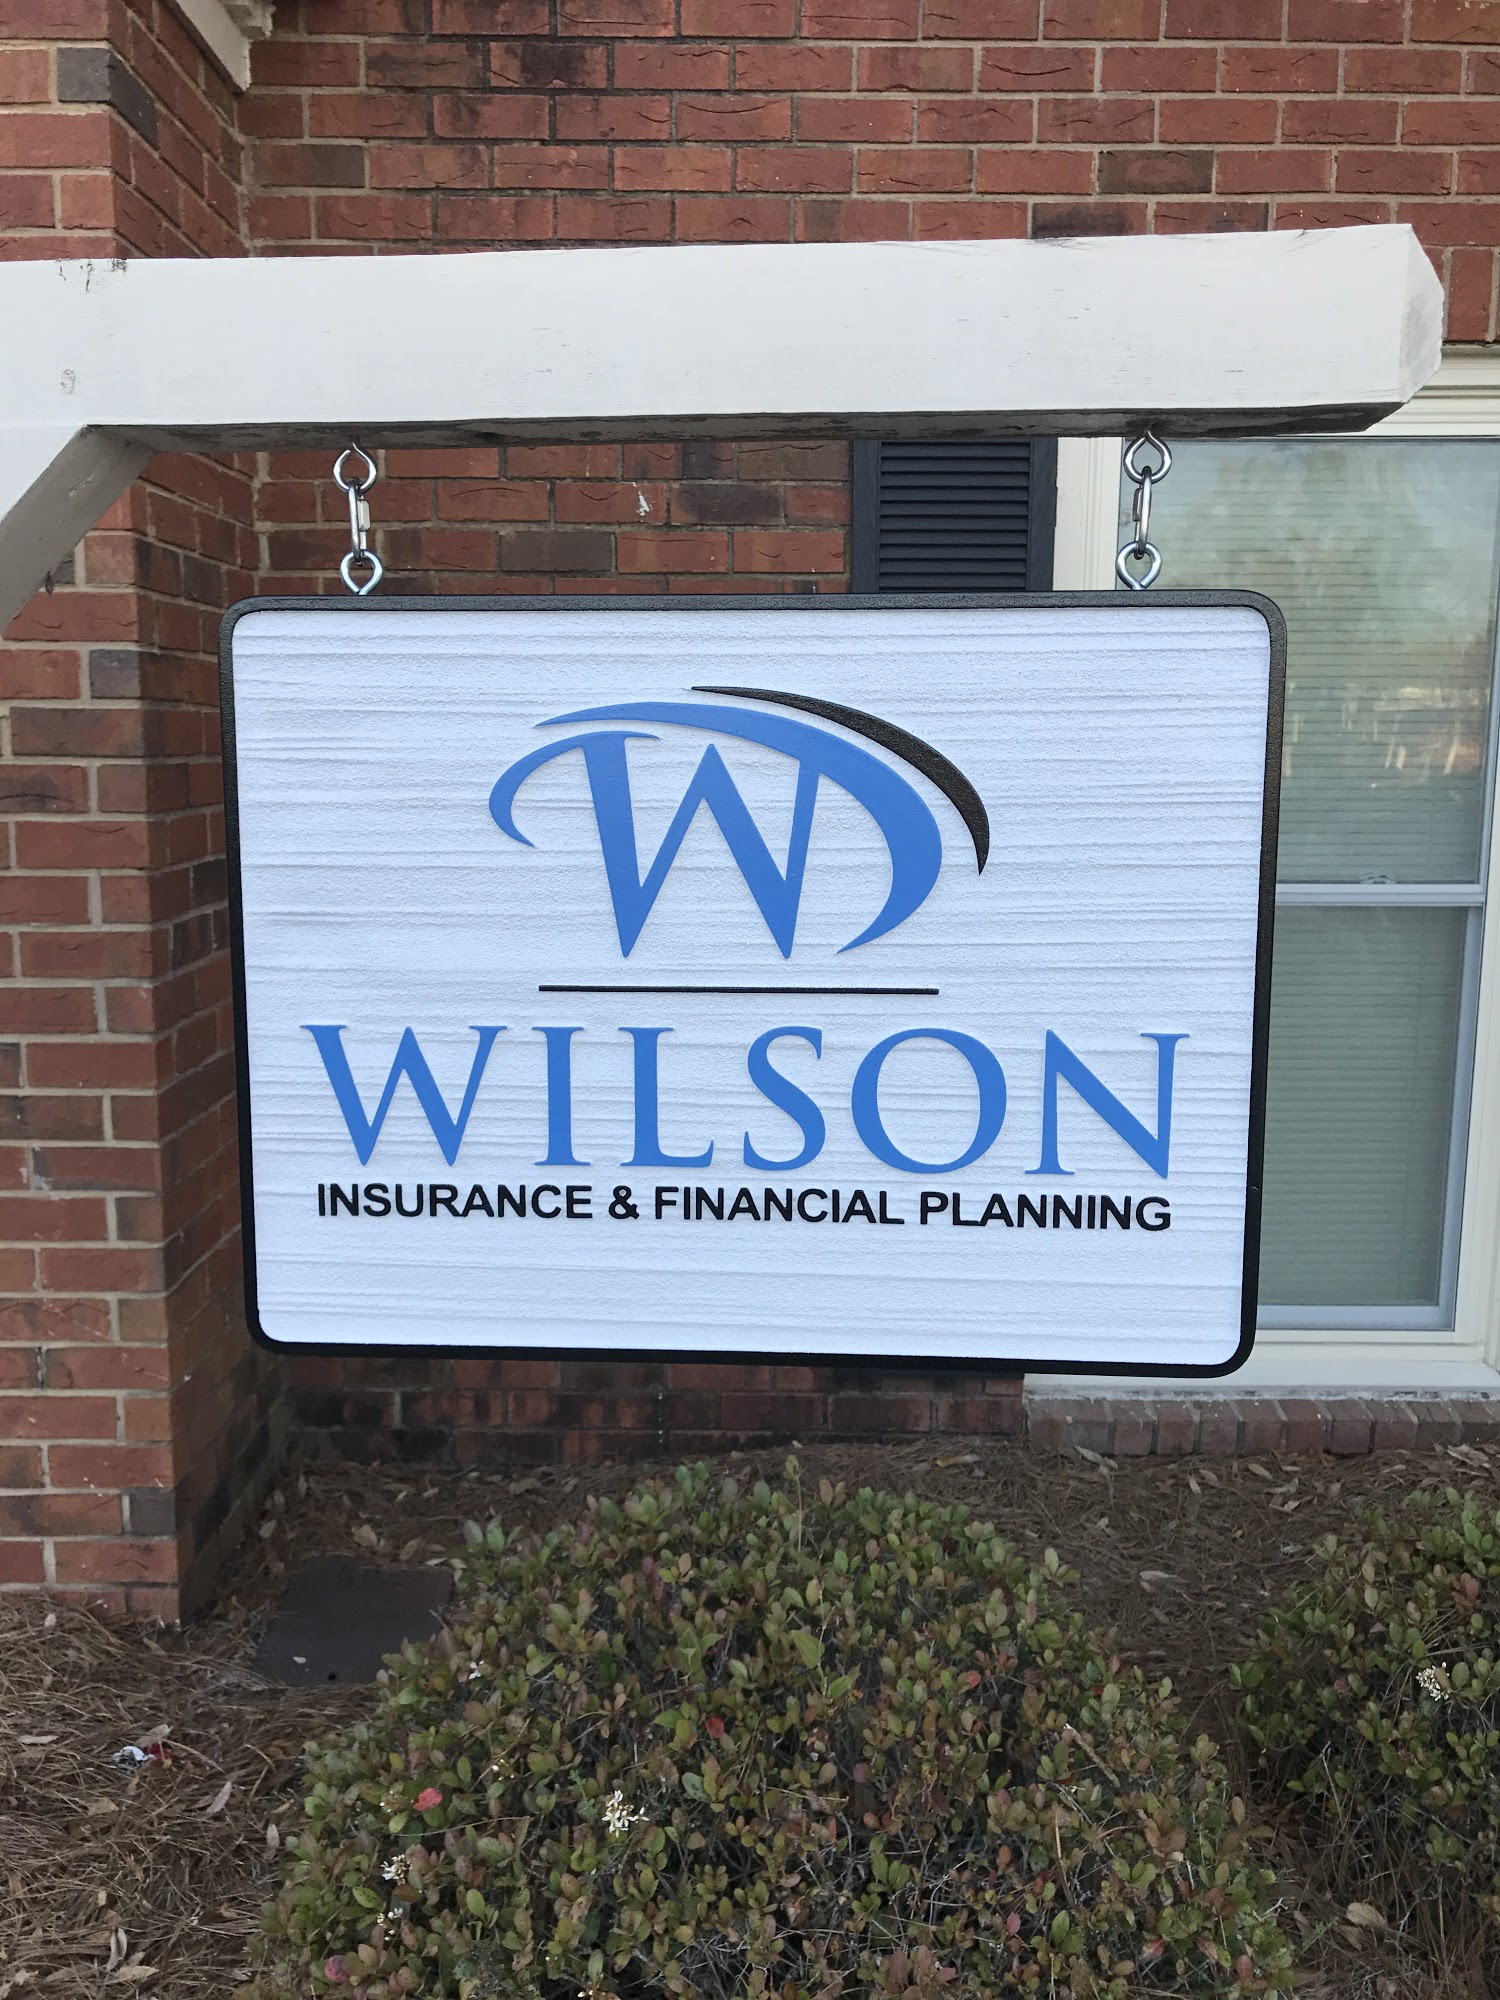 Wilson Insurance and Financial Planning, Inc.